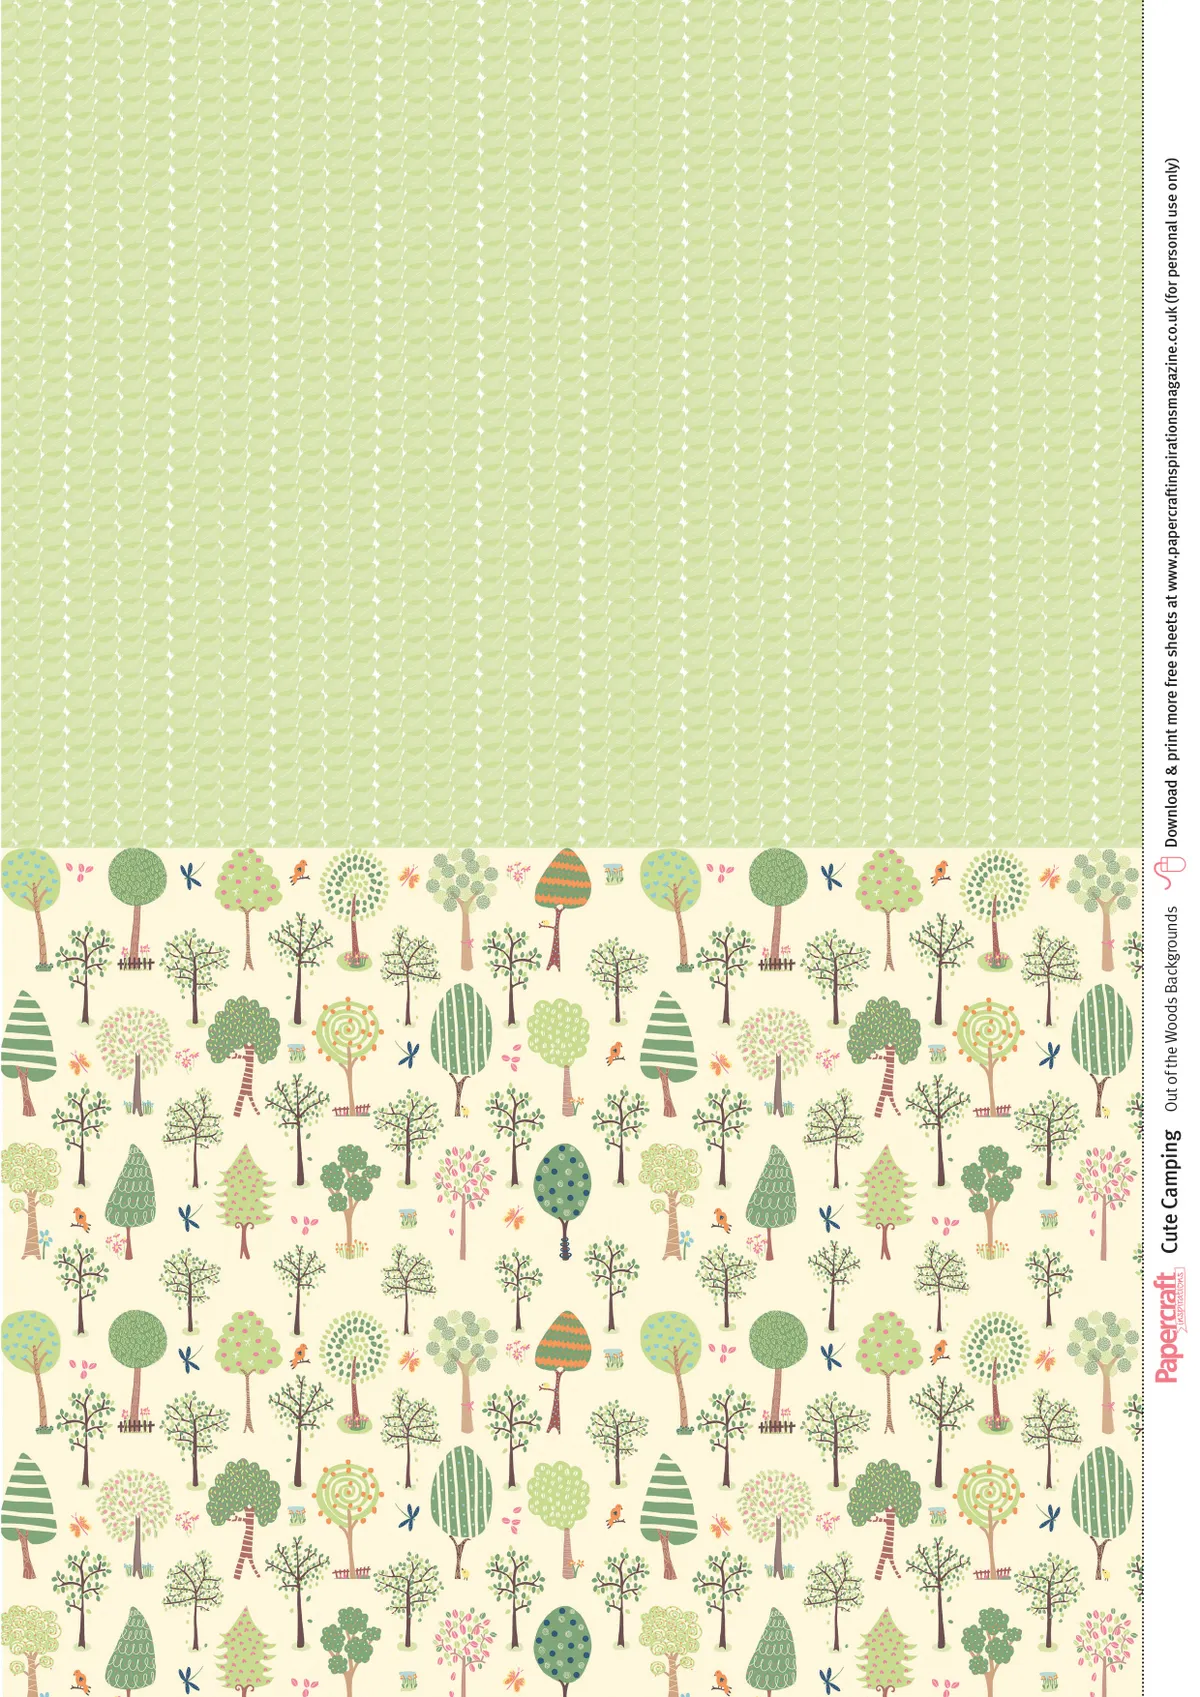 Cute Camping Paper Printables Issue 155 Sheet 4